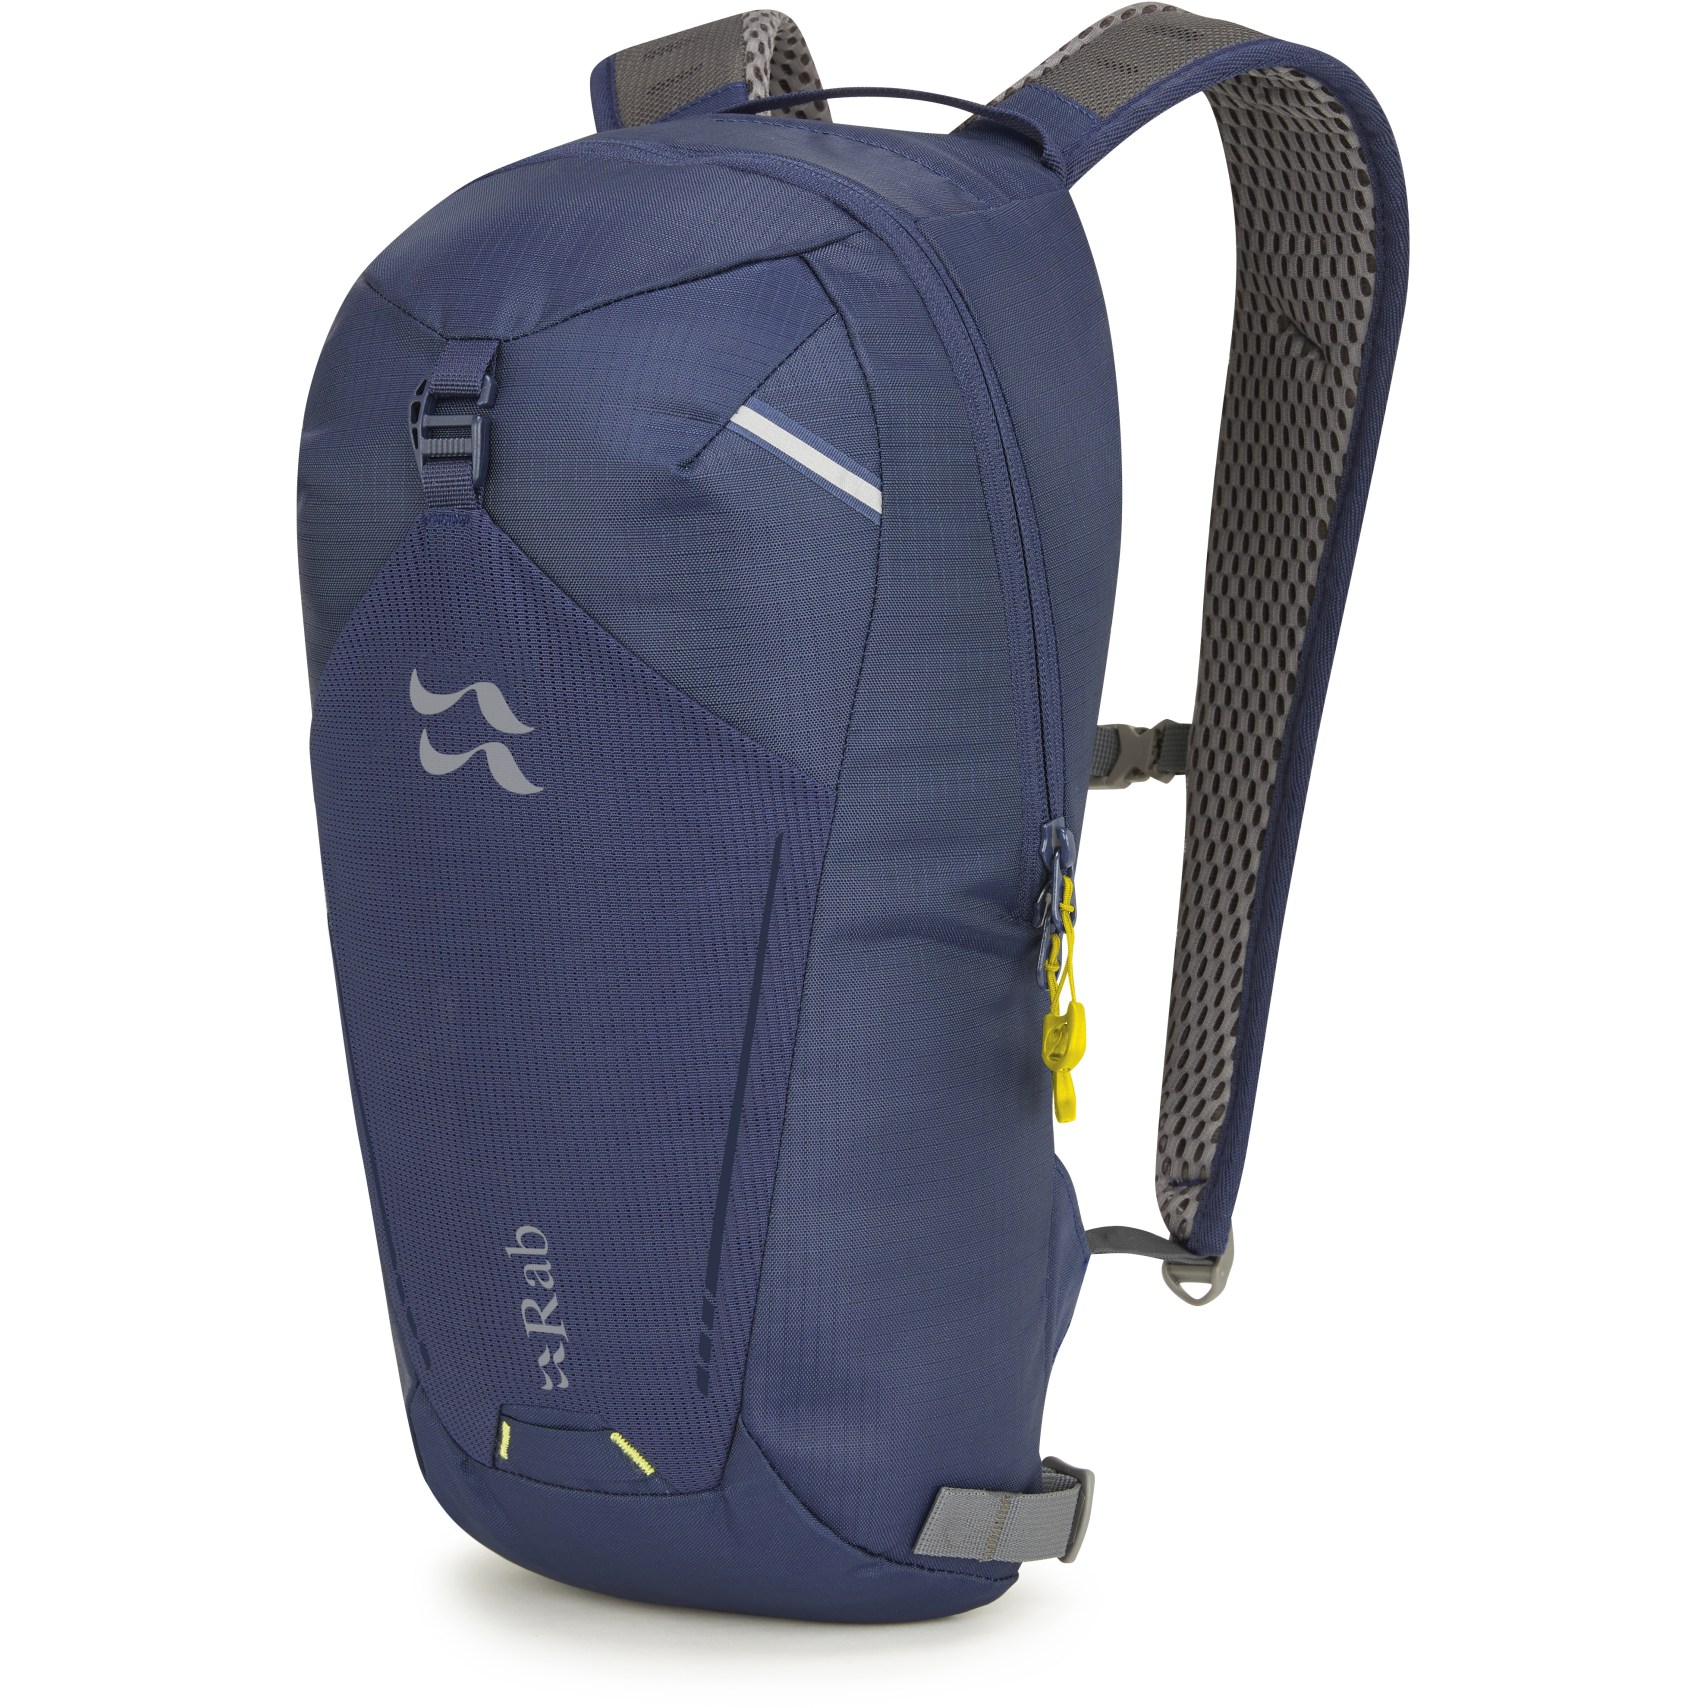 Picture of Rab Tensor 10L Backpack - deep ink